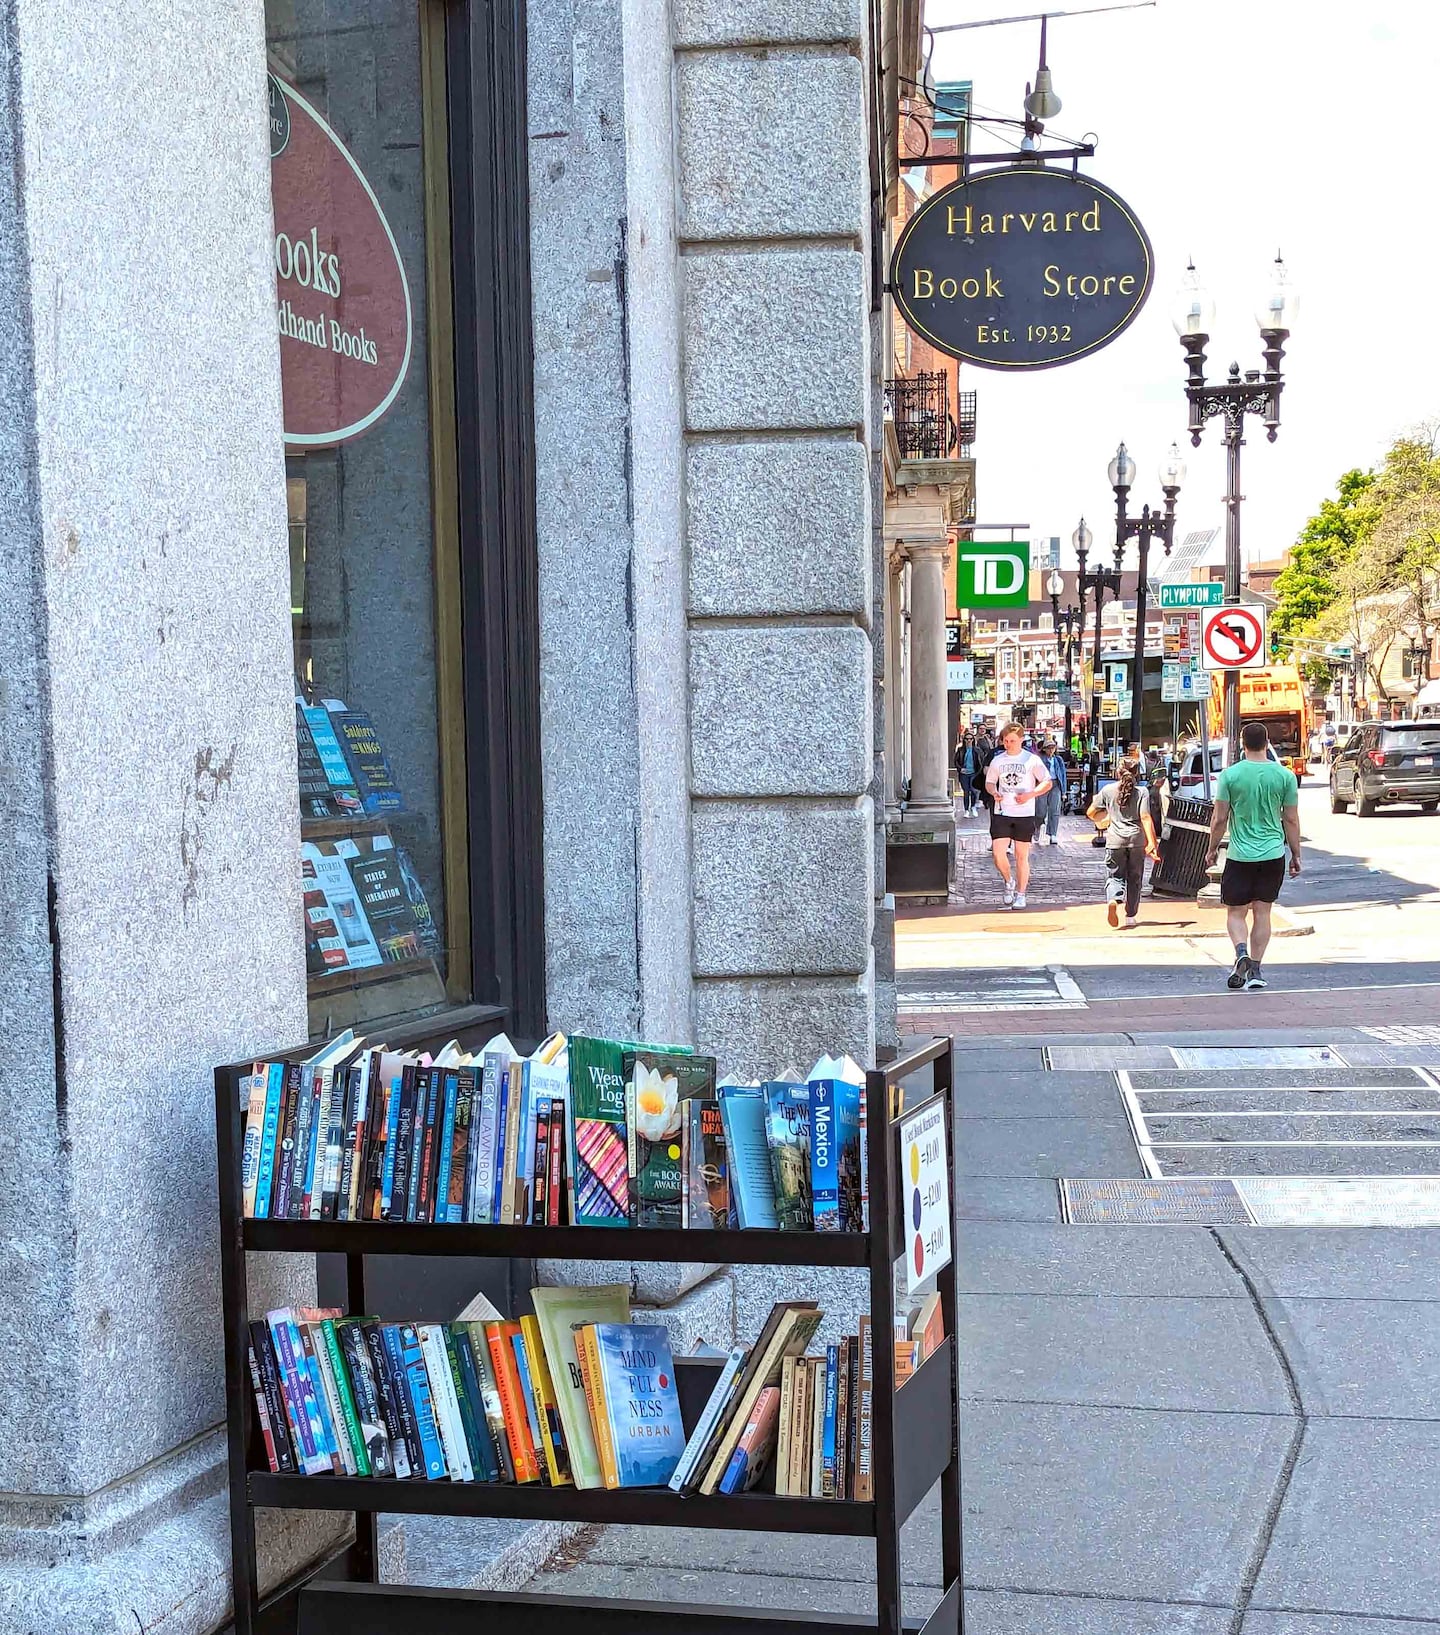 A cart of bargain books on the sidewalk helps to lure bibliophiles into Harvard Book Store.